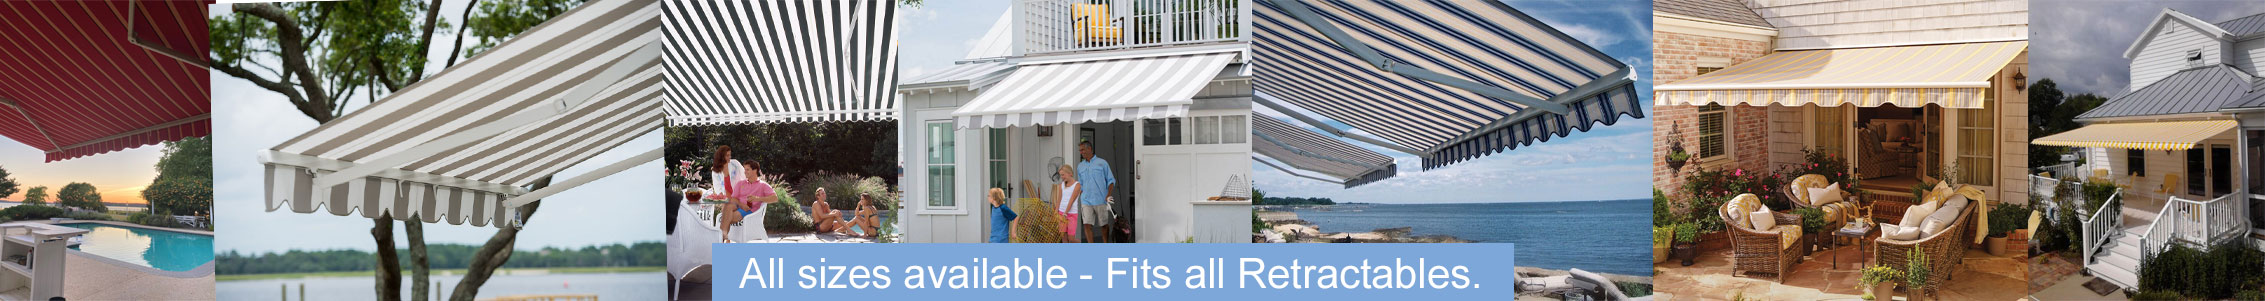 Retractable Awning Replacment Fabric